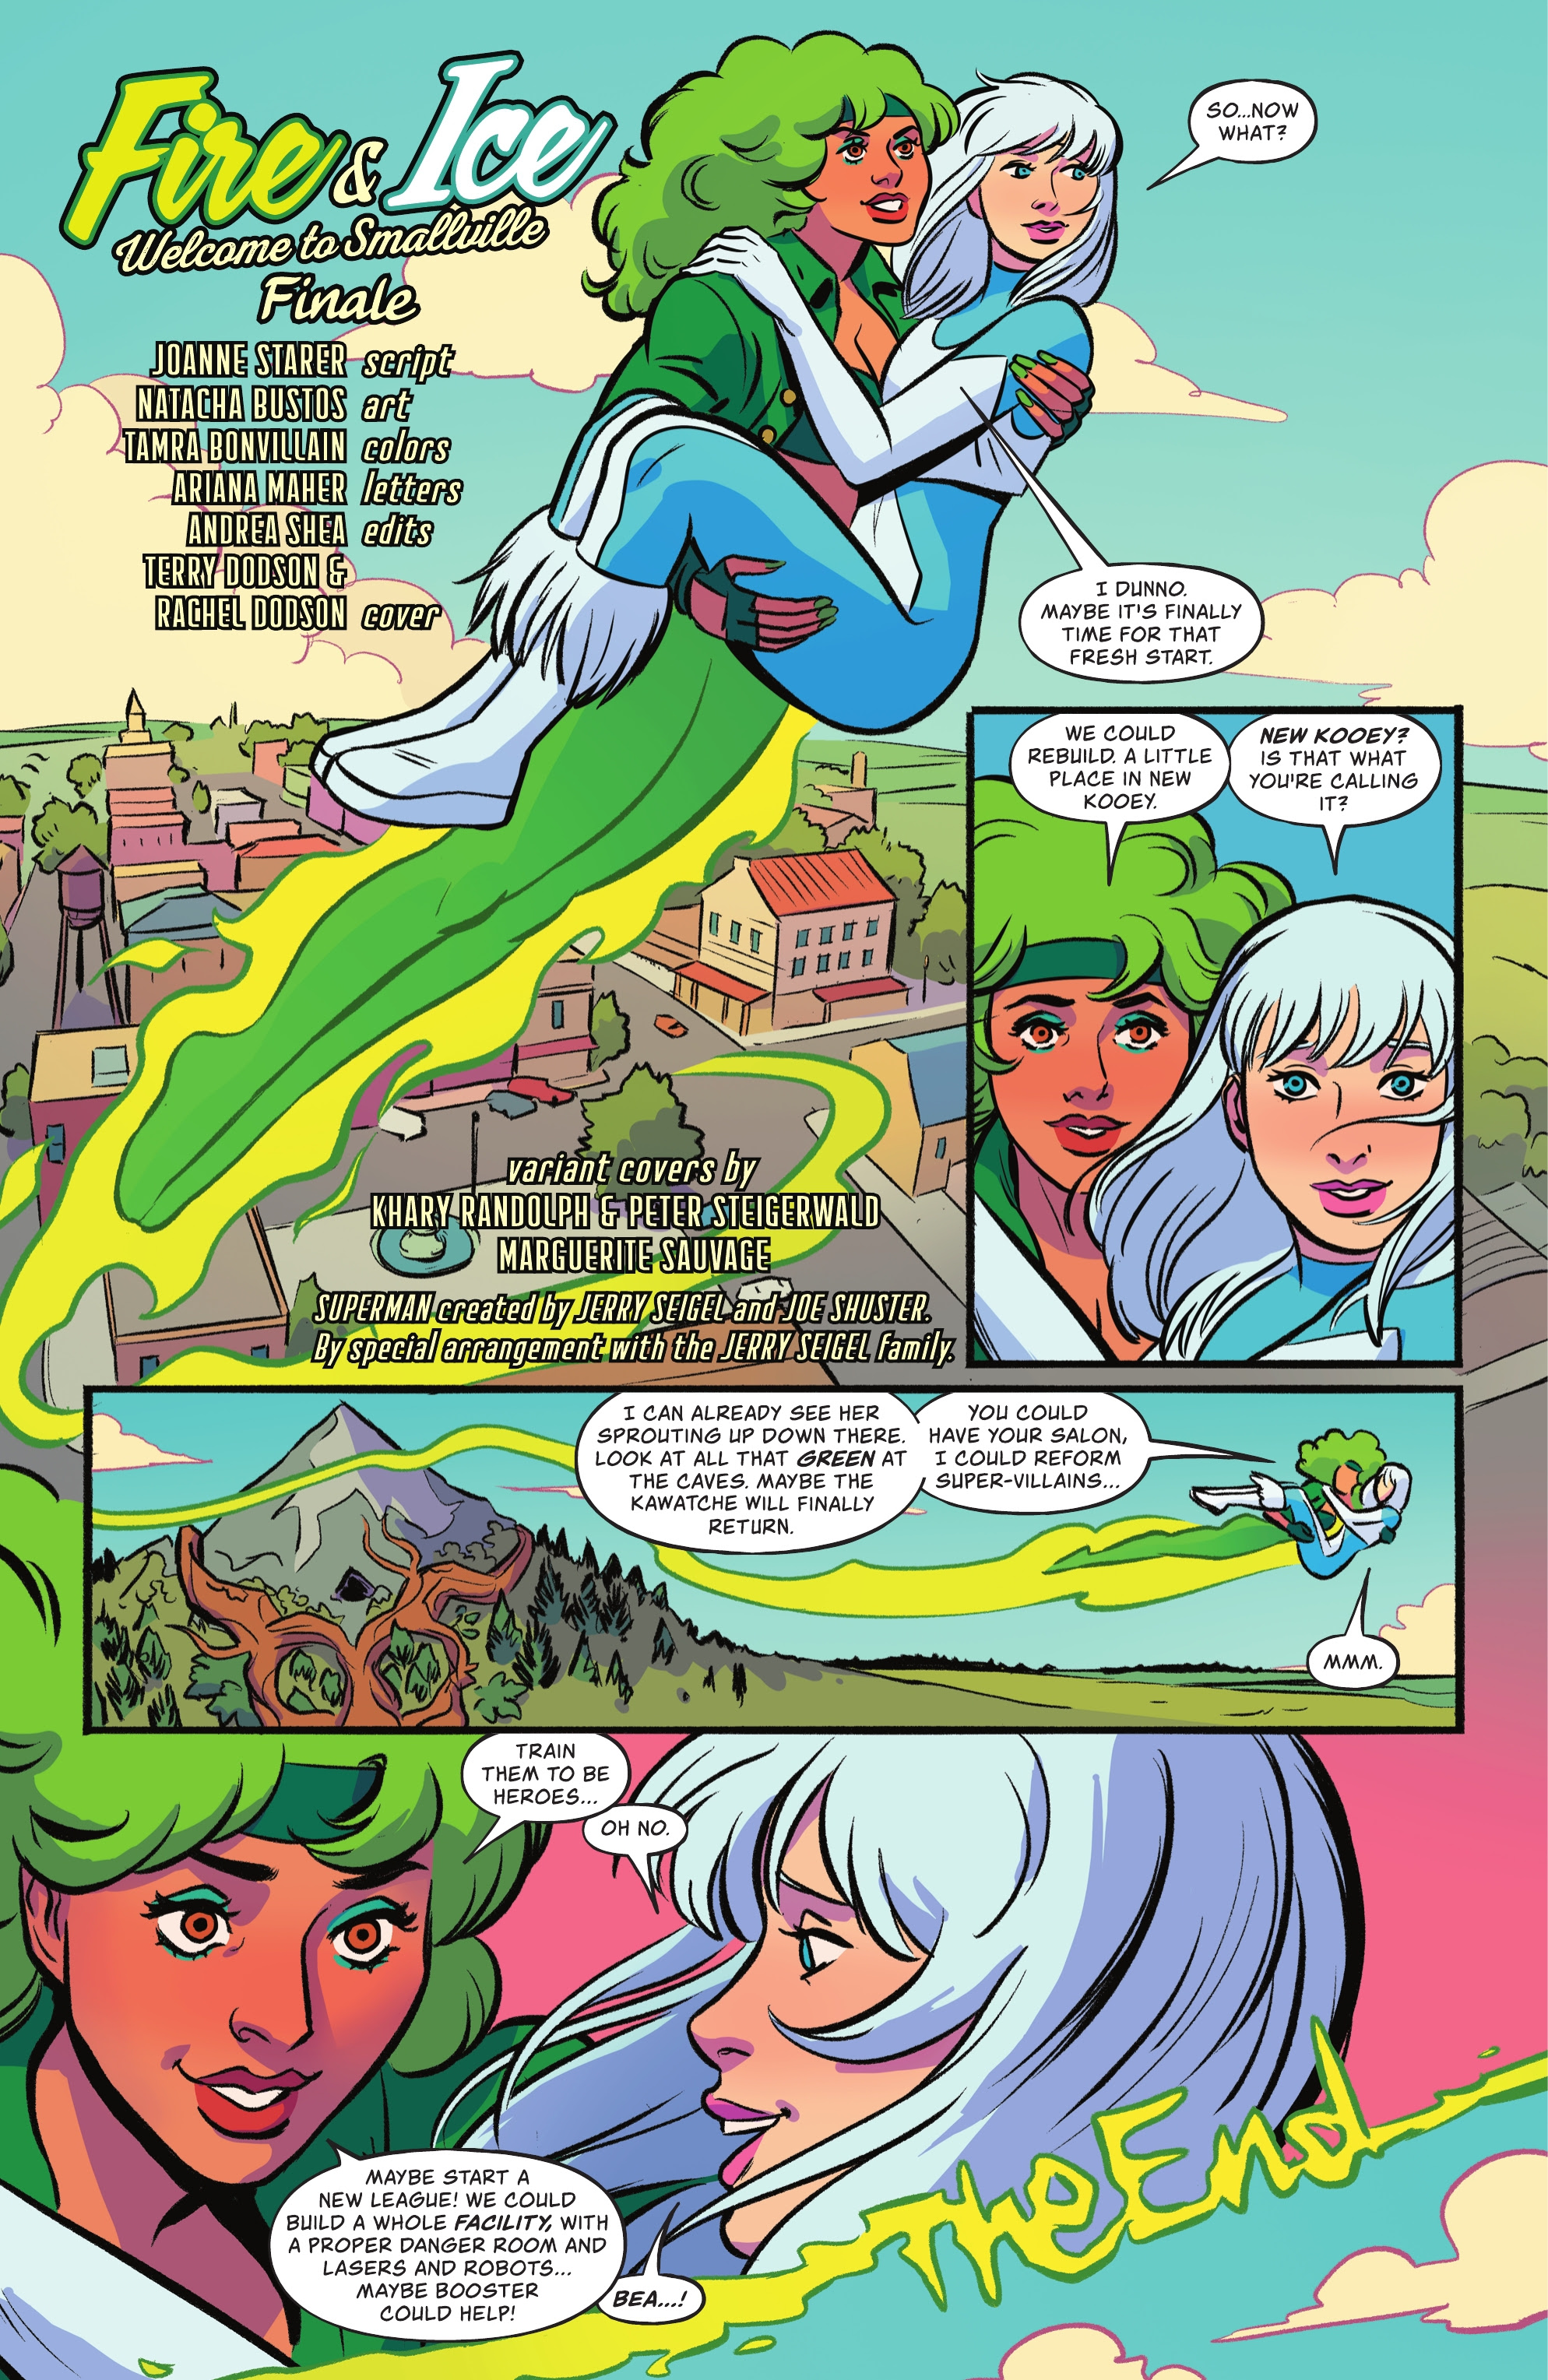 Read online Fire & Ice: Welcome to Smallville comic -  Issue #6 - 22